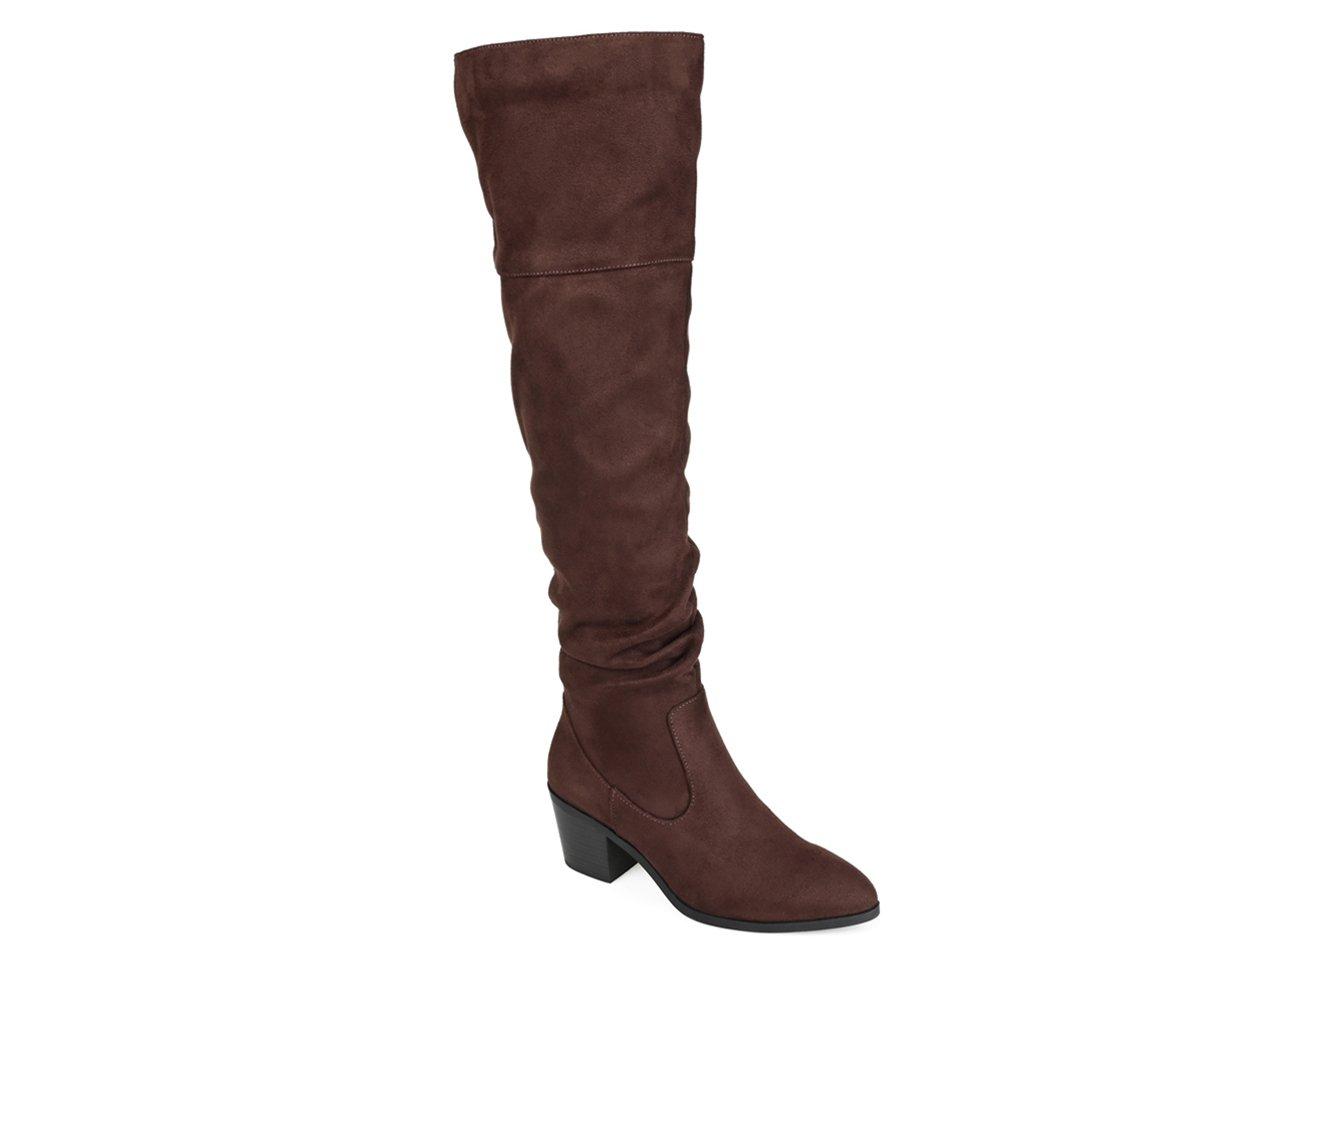 Women's Journee Collection Zivia Extra Wide Calf Over-The-Knee Boots